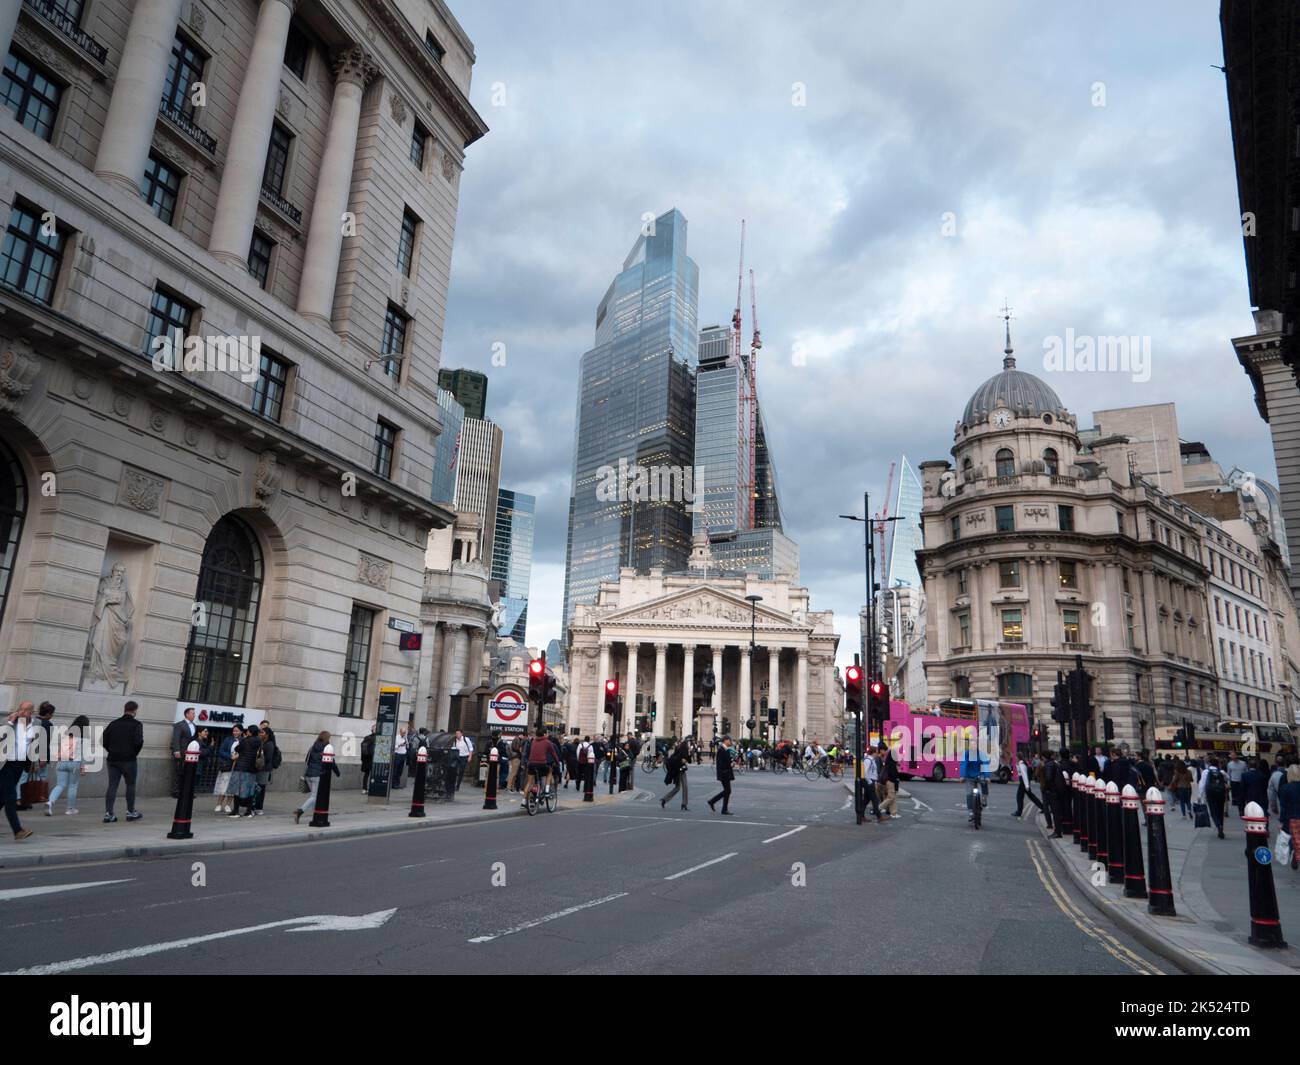 View of Financial district,  City of London picture shows London Royal Exchange with pillars in centre with 22 Bishopsgate modern skyscraper behind and Number one Cornhill the domed building to the right Stock Photo